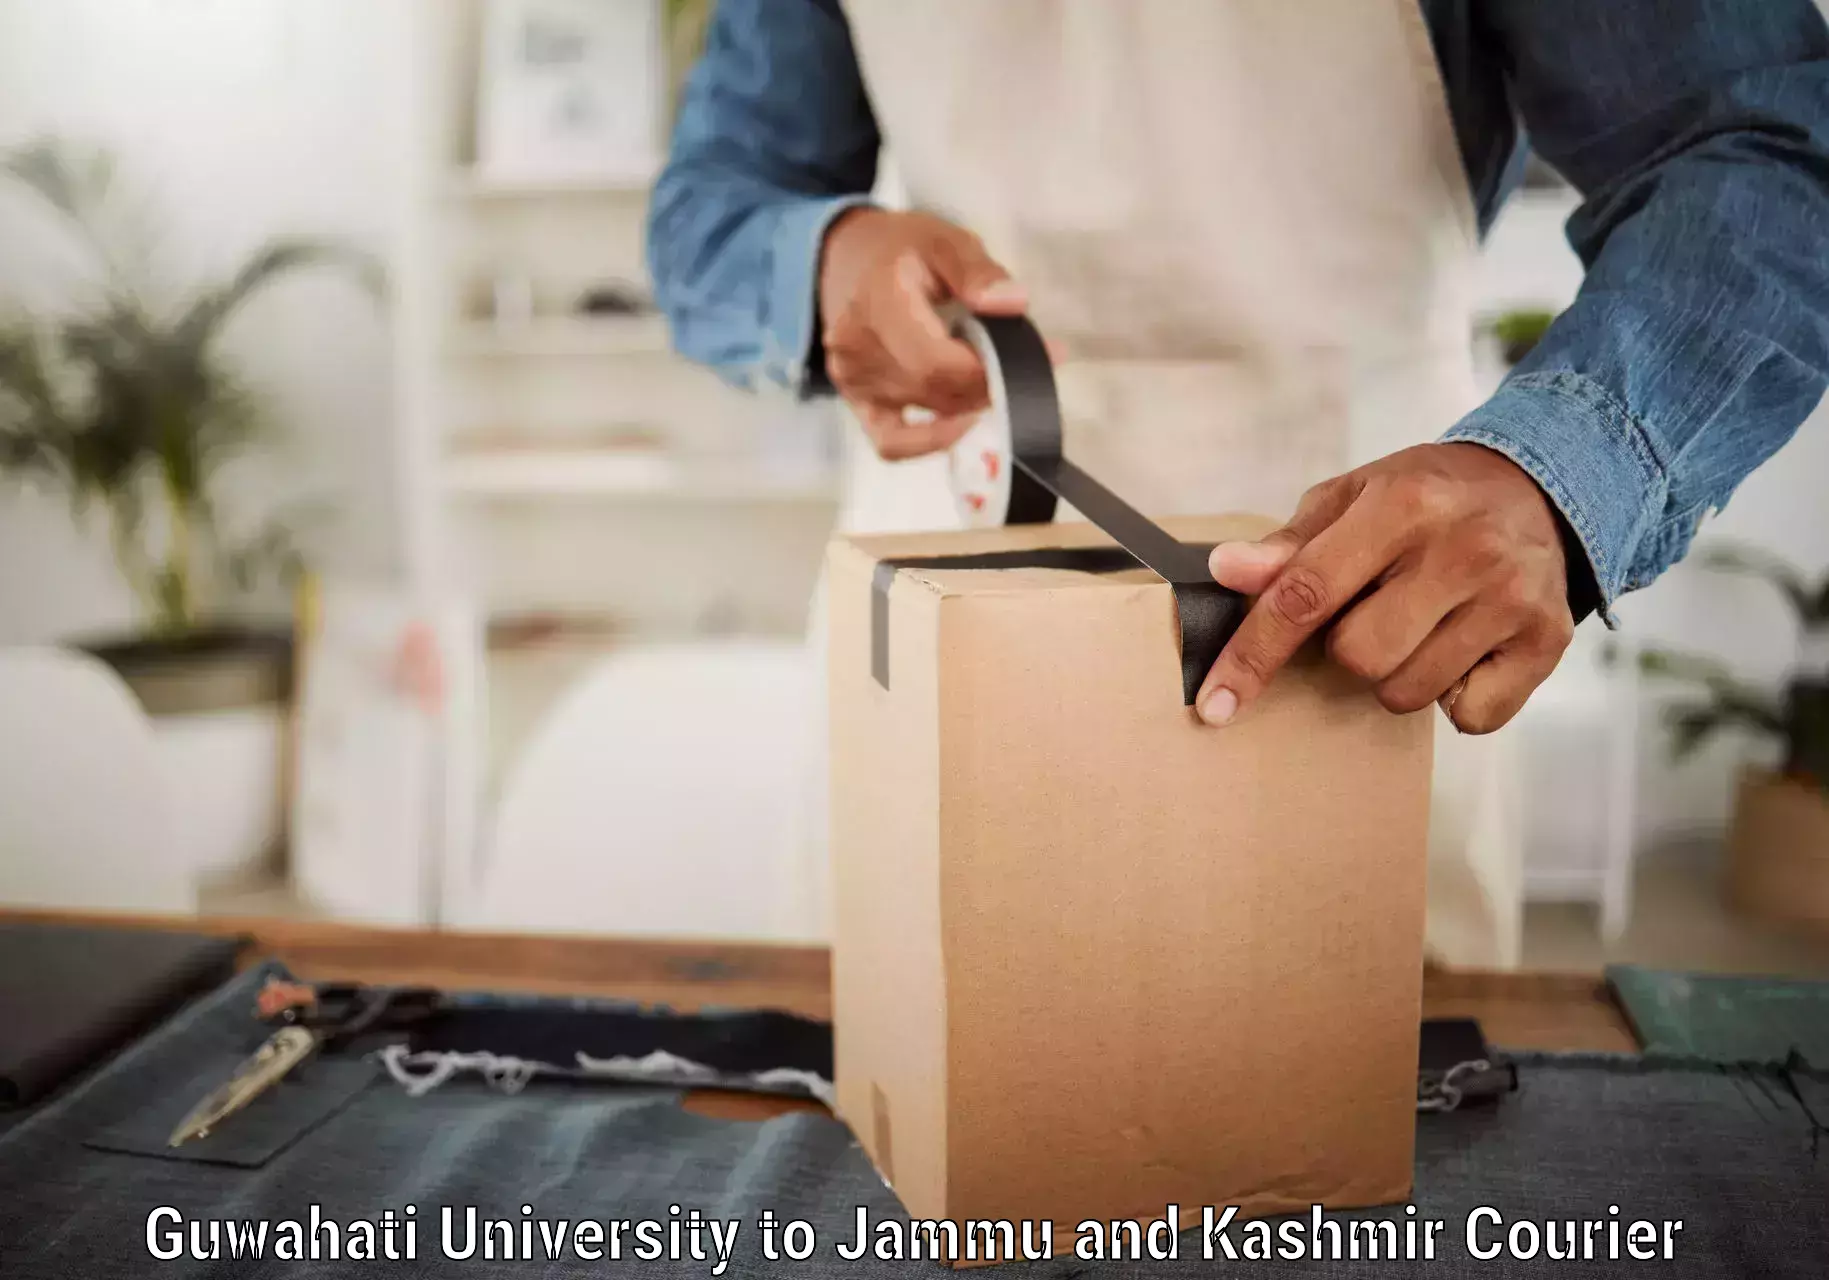 Secure package delivery Guwahati University to Jammu and Kashmir